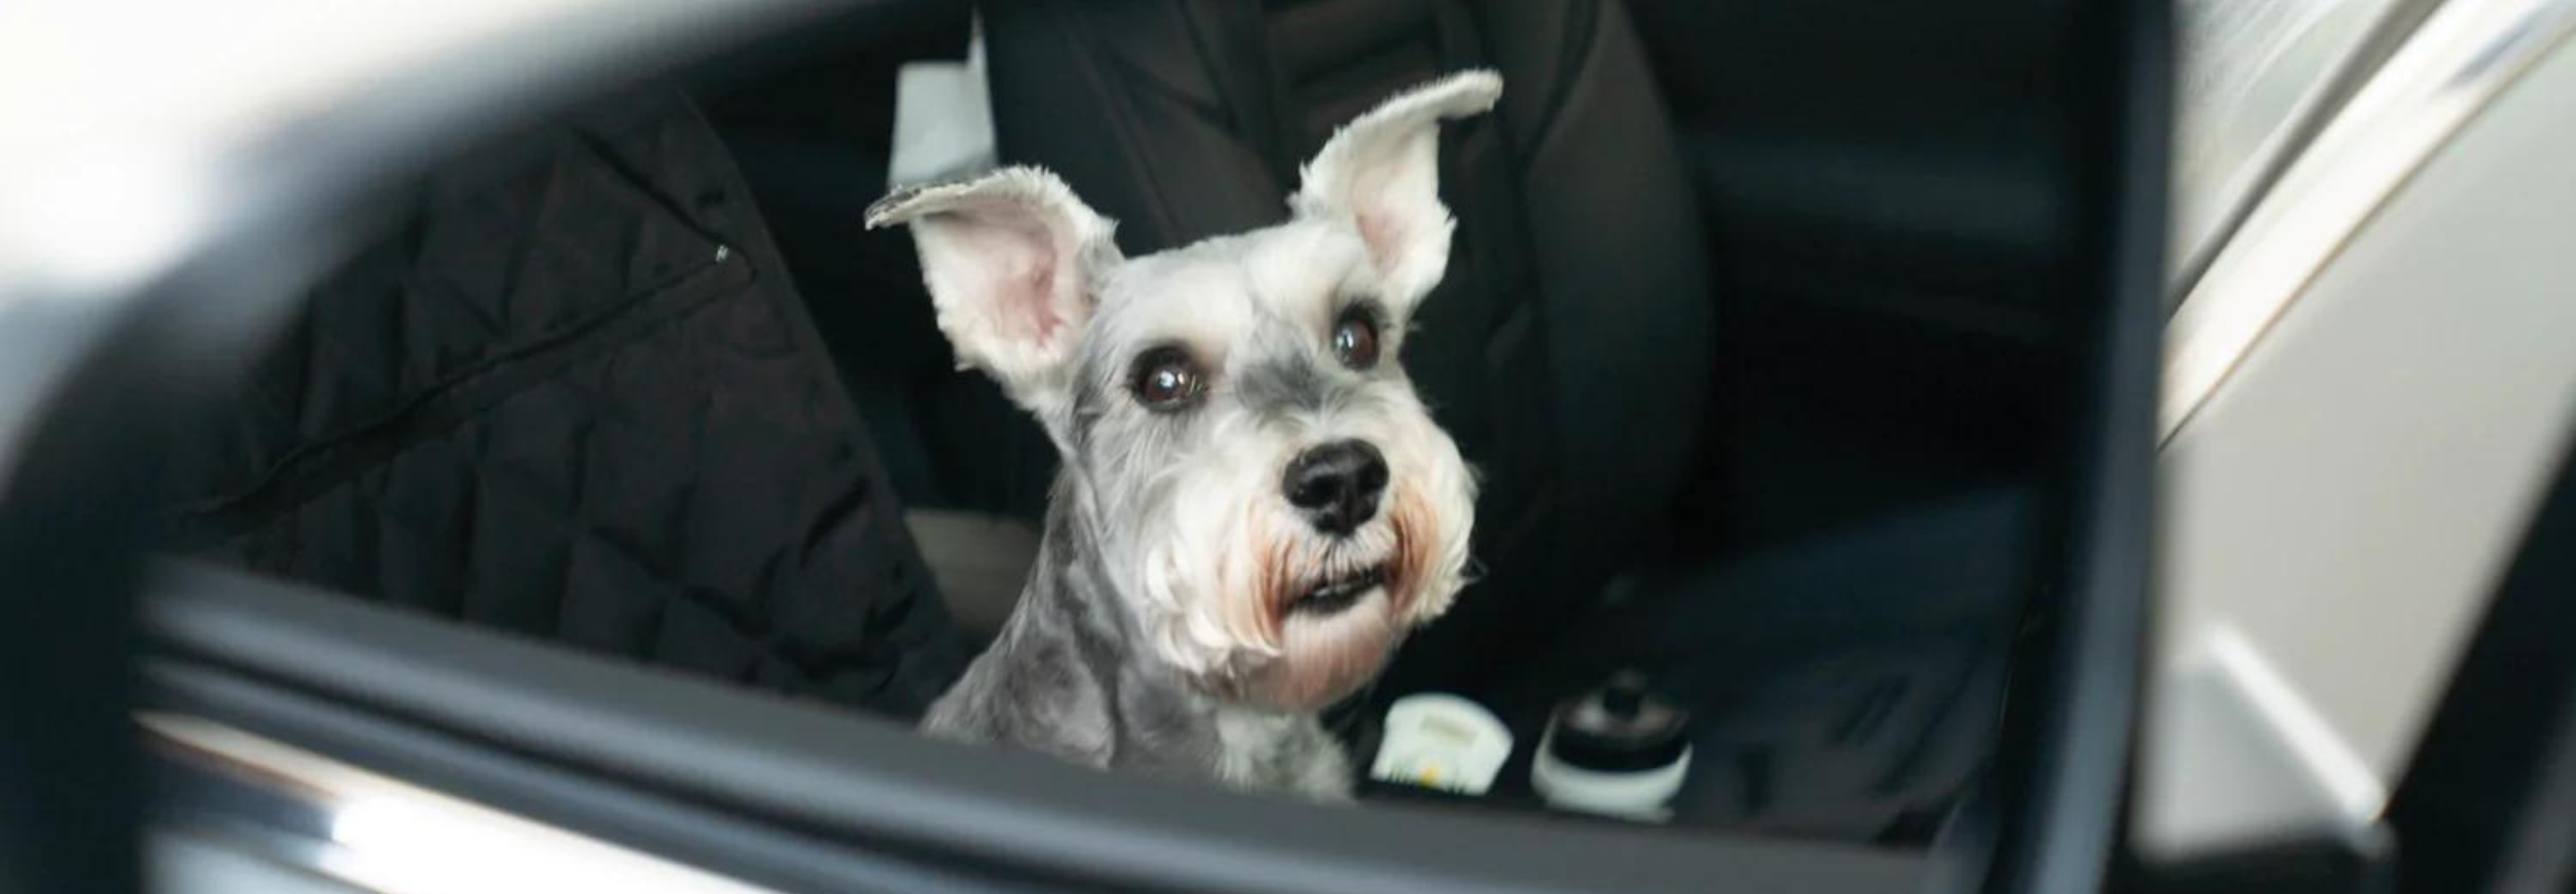 Get Ready to Hit the Road With Your Dog! 7 Must-Have Items for a Fun and Safe Car Ride